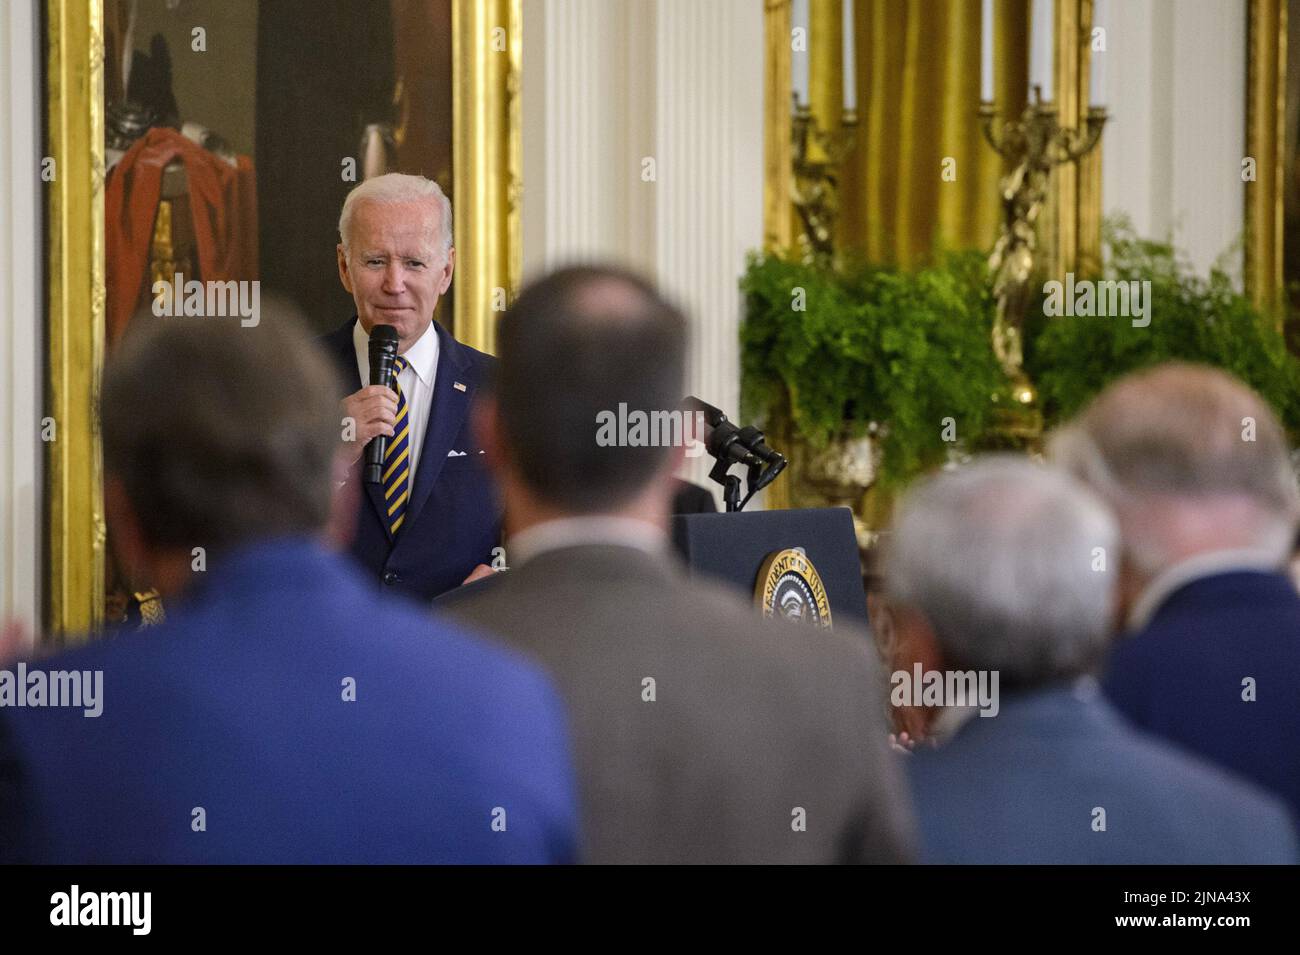 Washington, United States. 10th Aug, 2022. President Joe Biden looks on at members of Congress who helped pass the PACT Act, a bill to expand health care benefits for veterans exposed to toxic burn pits, during a signing ceremony in the East Room of the White House in Washington, DC on Wednesday, August 10, 2022. Photo by Bonnie Cash/UPI Credit: UPI/Alamy Live News Stock Photo